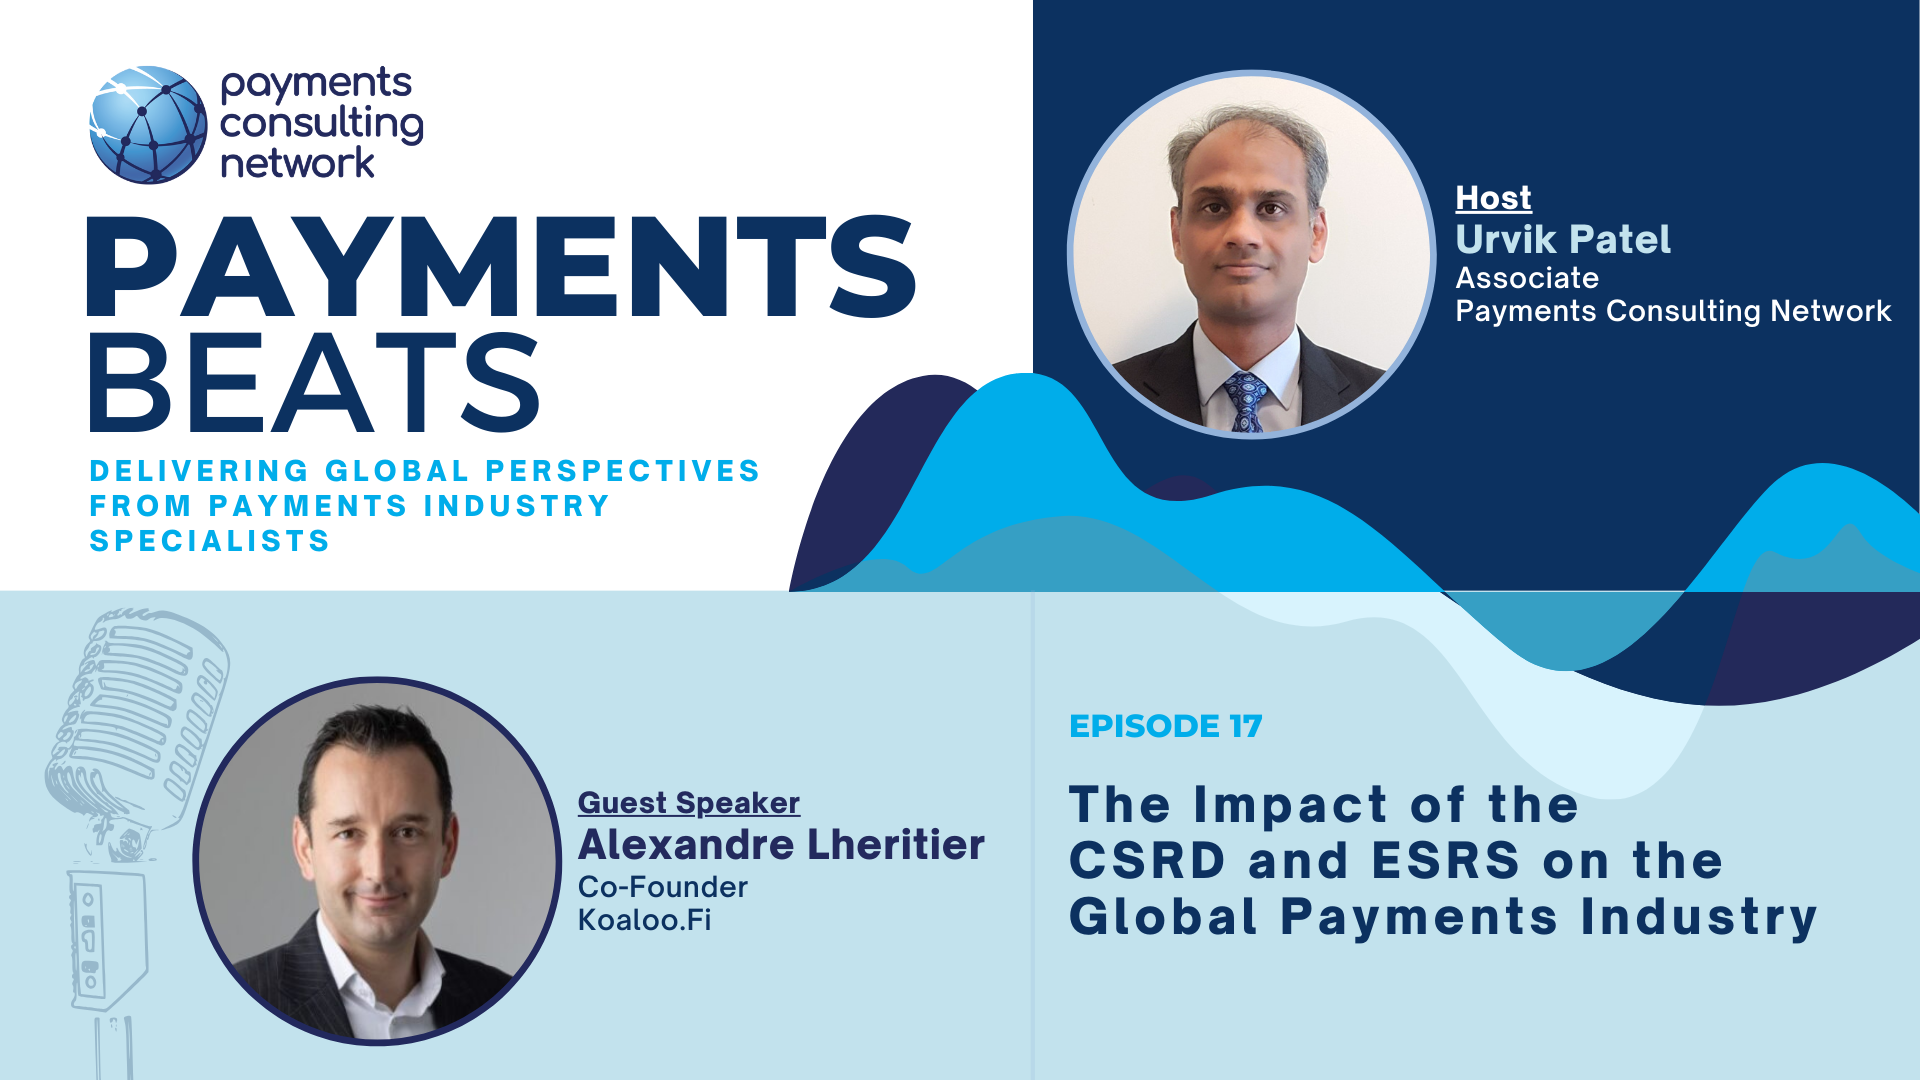 Episode 17 The Impact of the CSRD and ESRS on the Global Payments Industry